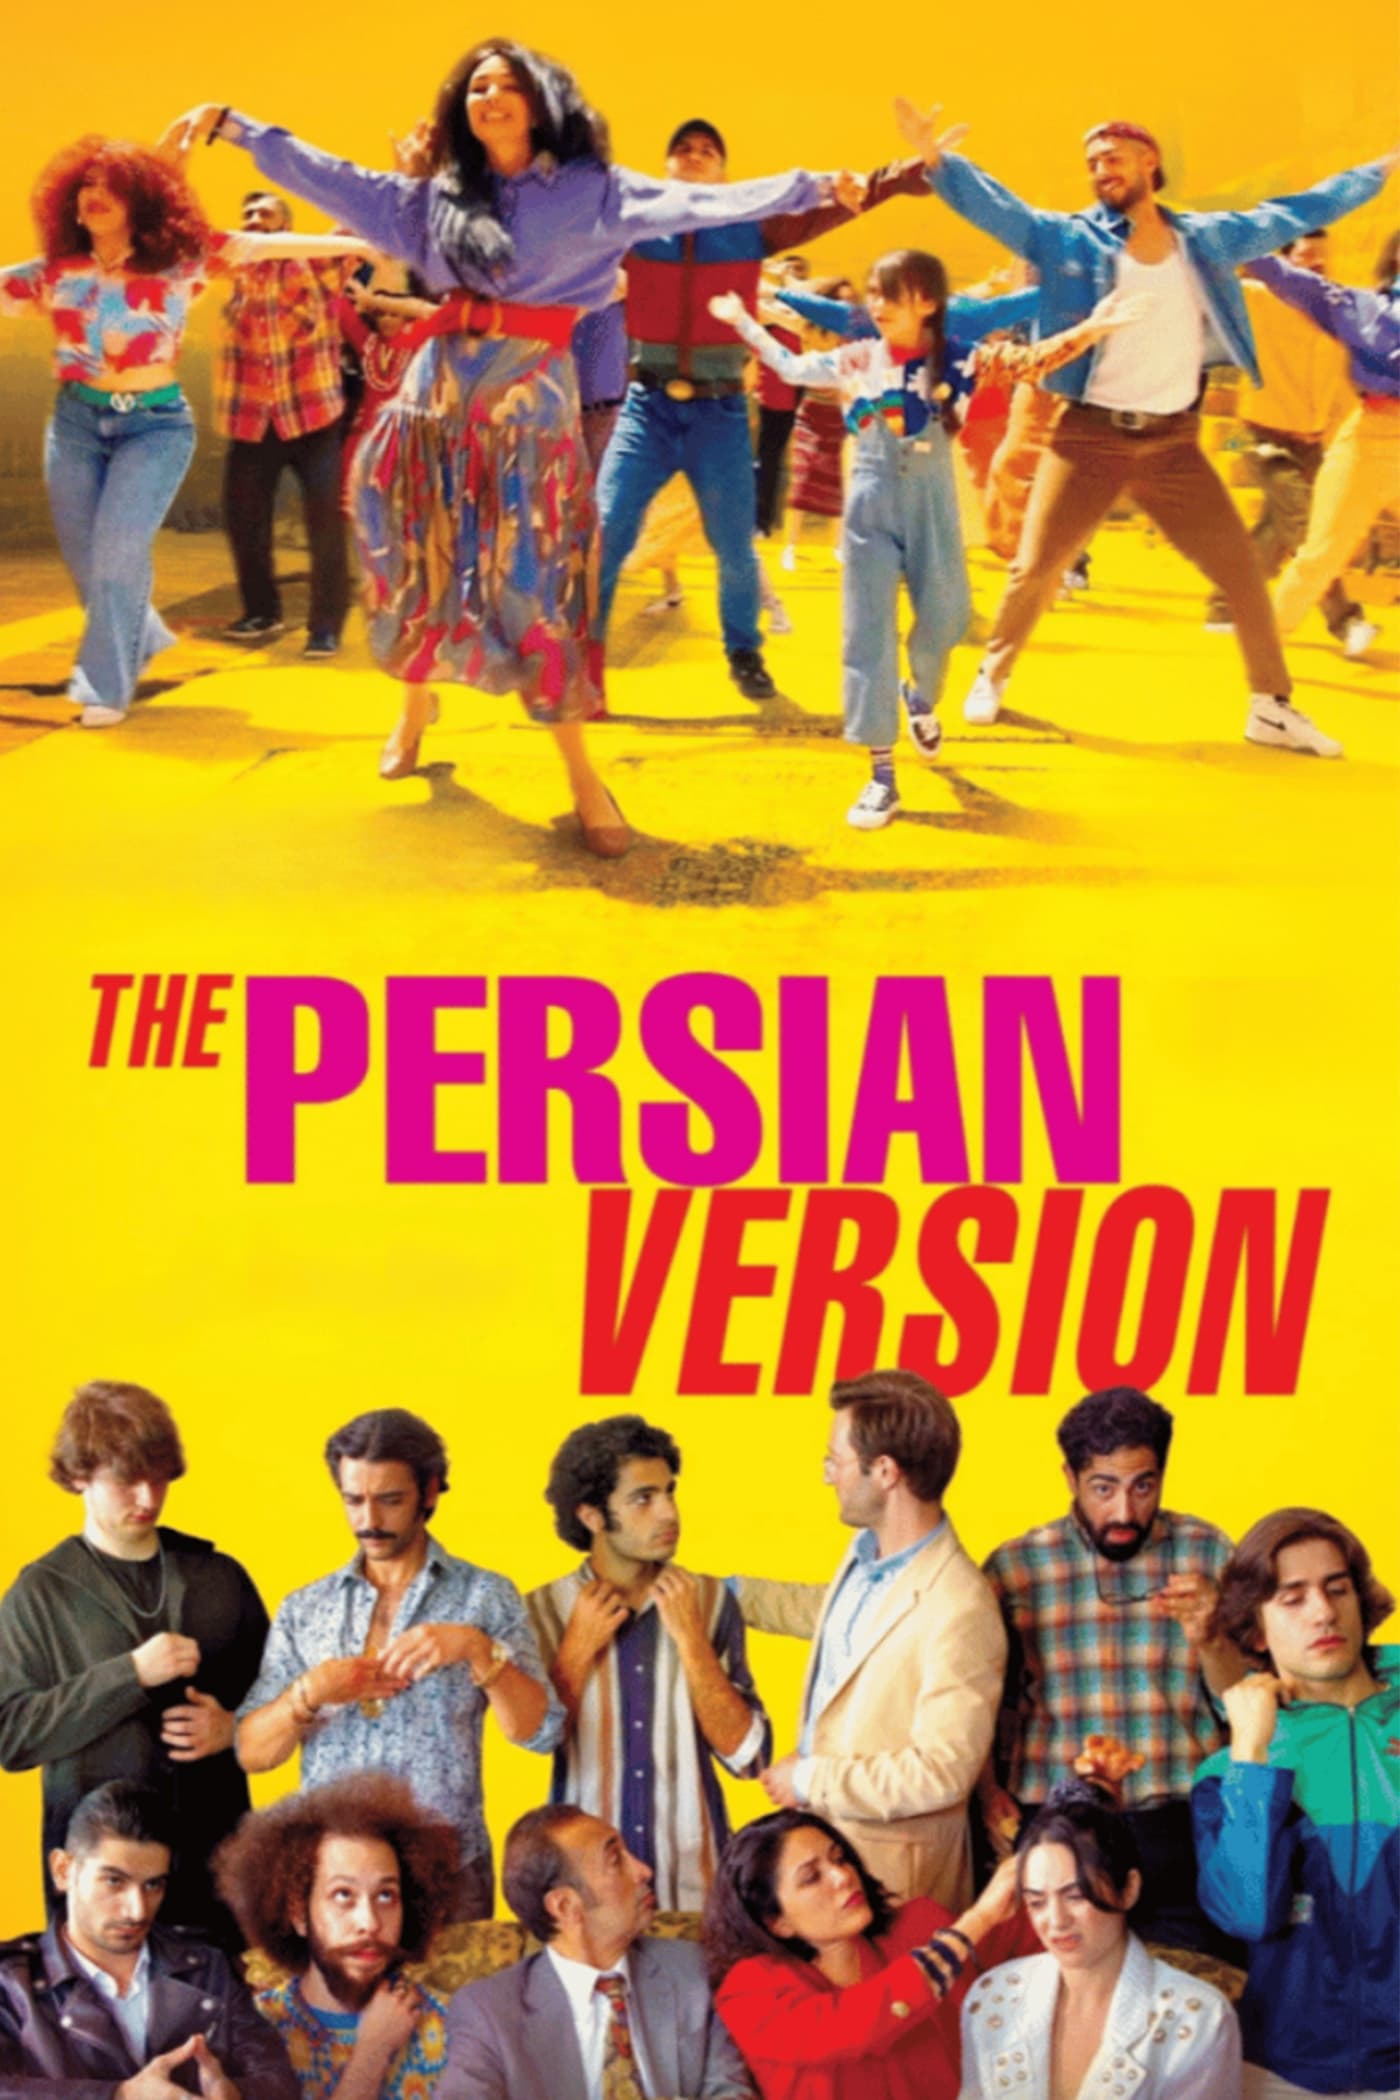 Poster for the movie "The Persian Version"